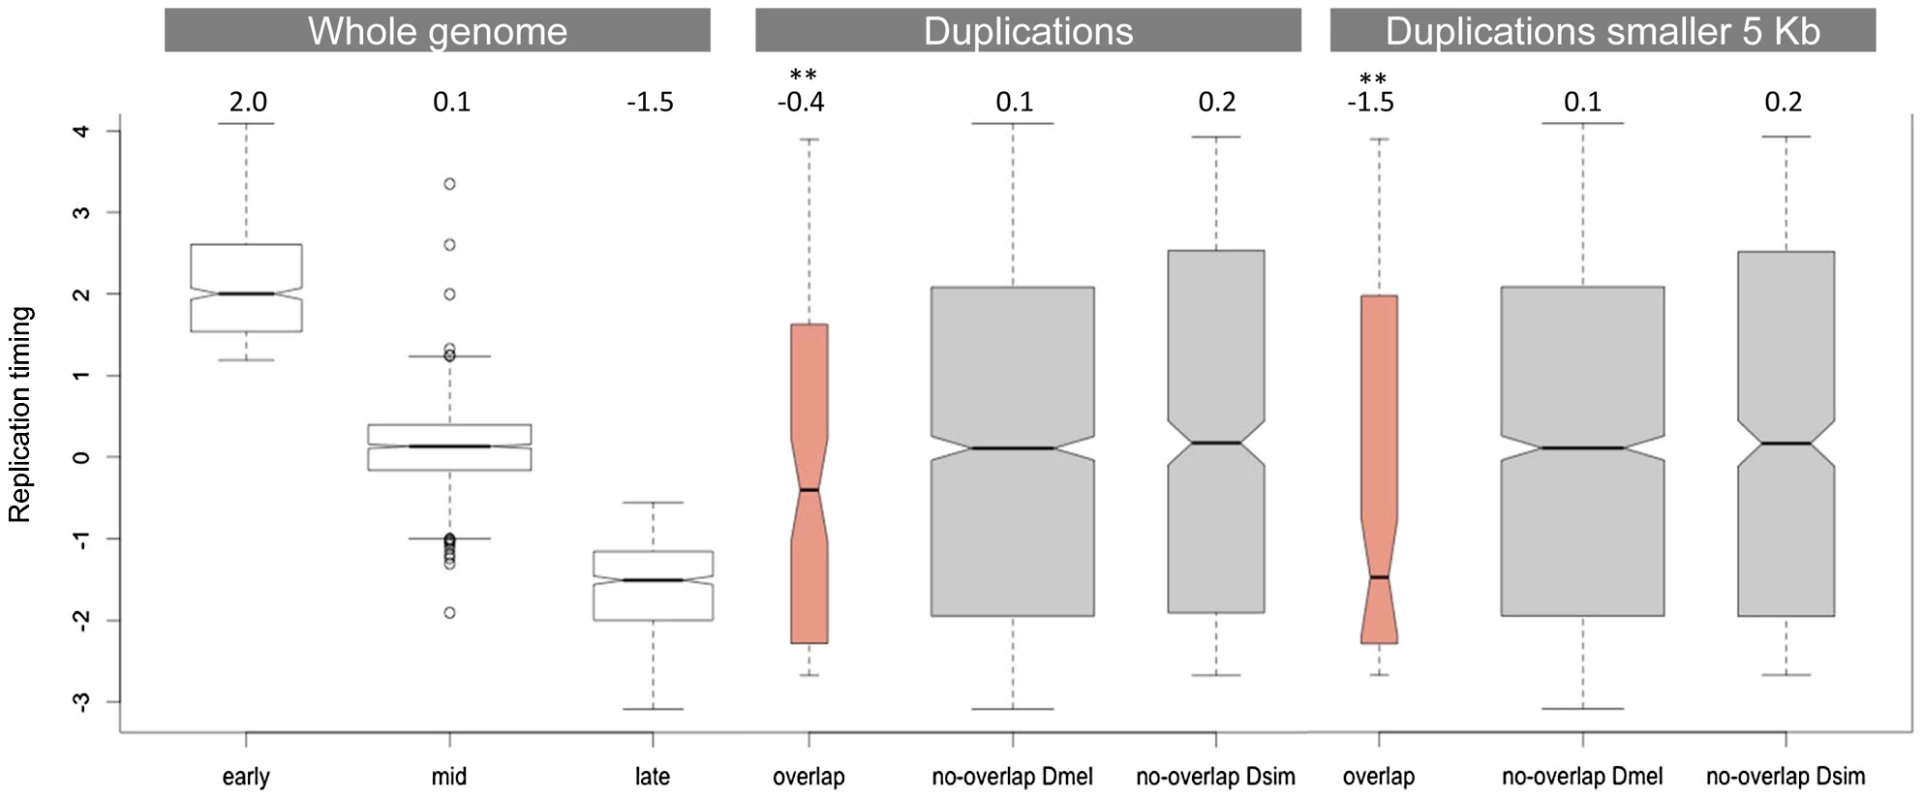 Replication timing of duplications overlapping between <i>D. simulans</i> and <i>D. melanogaster</i>.